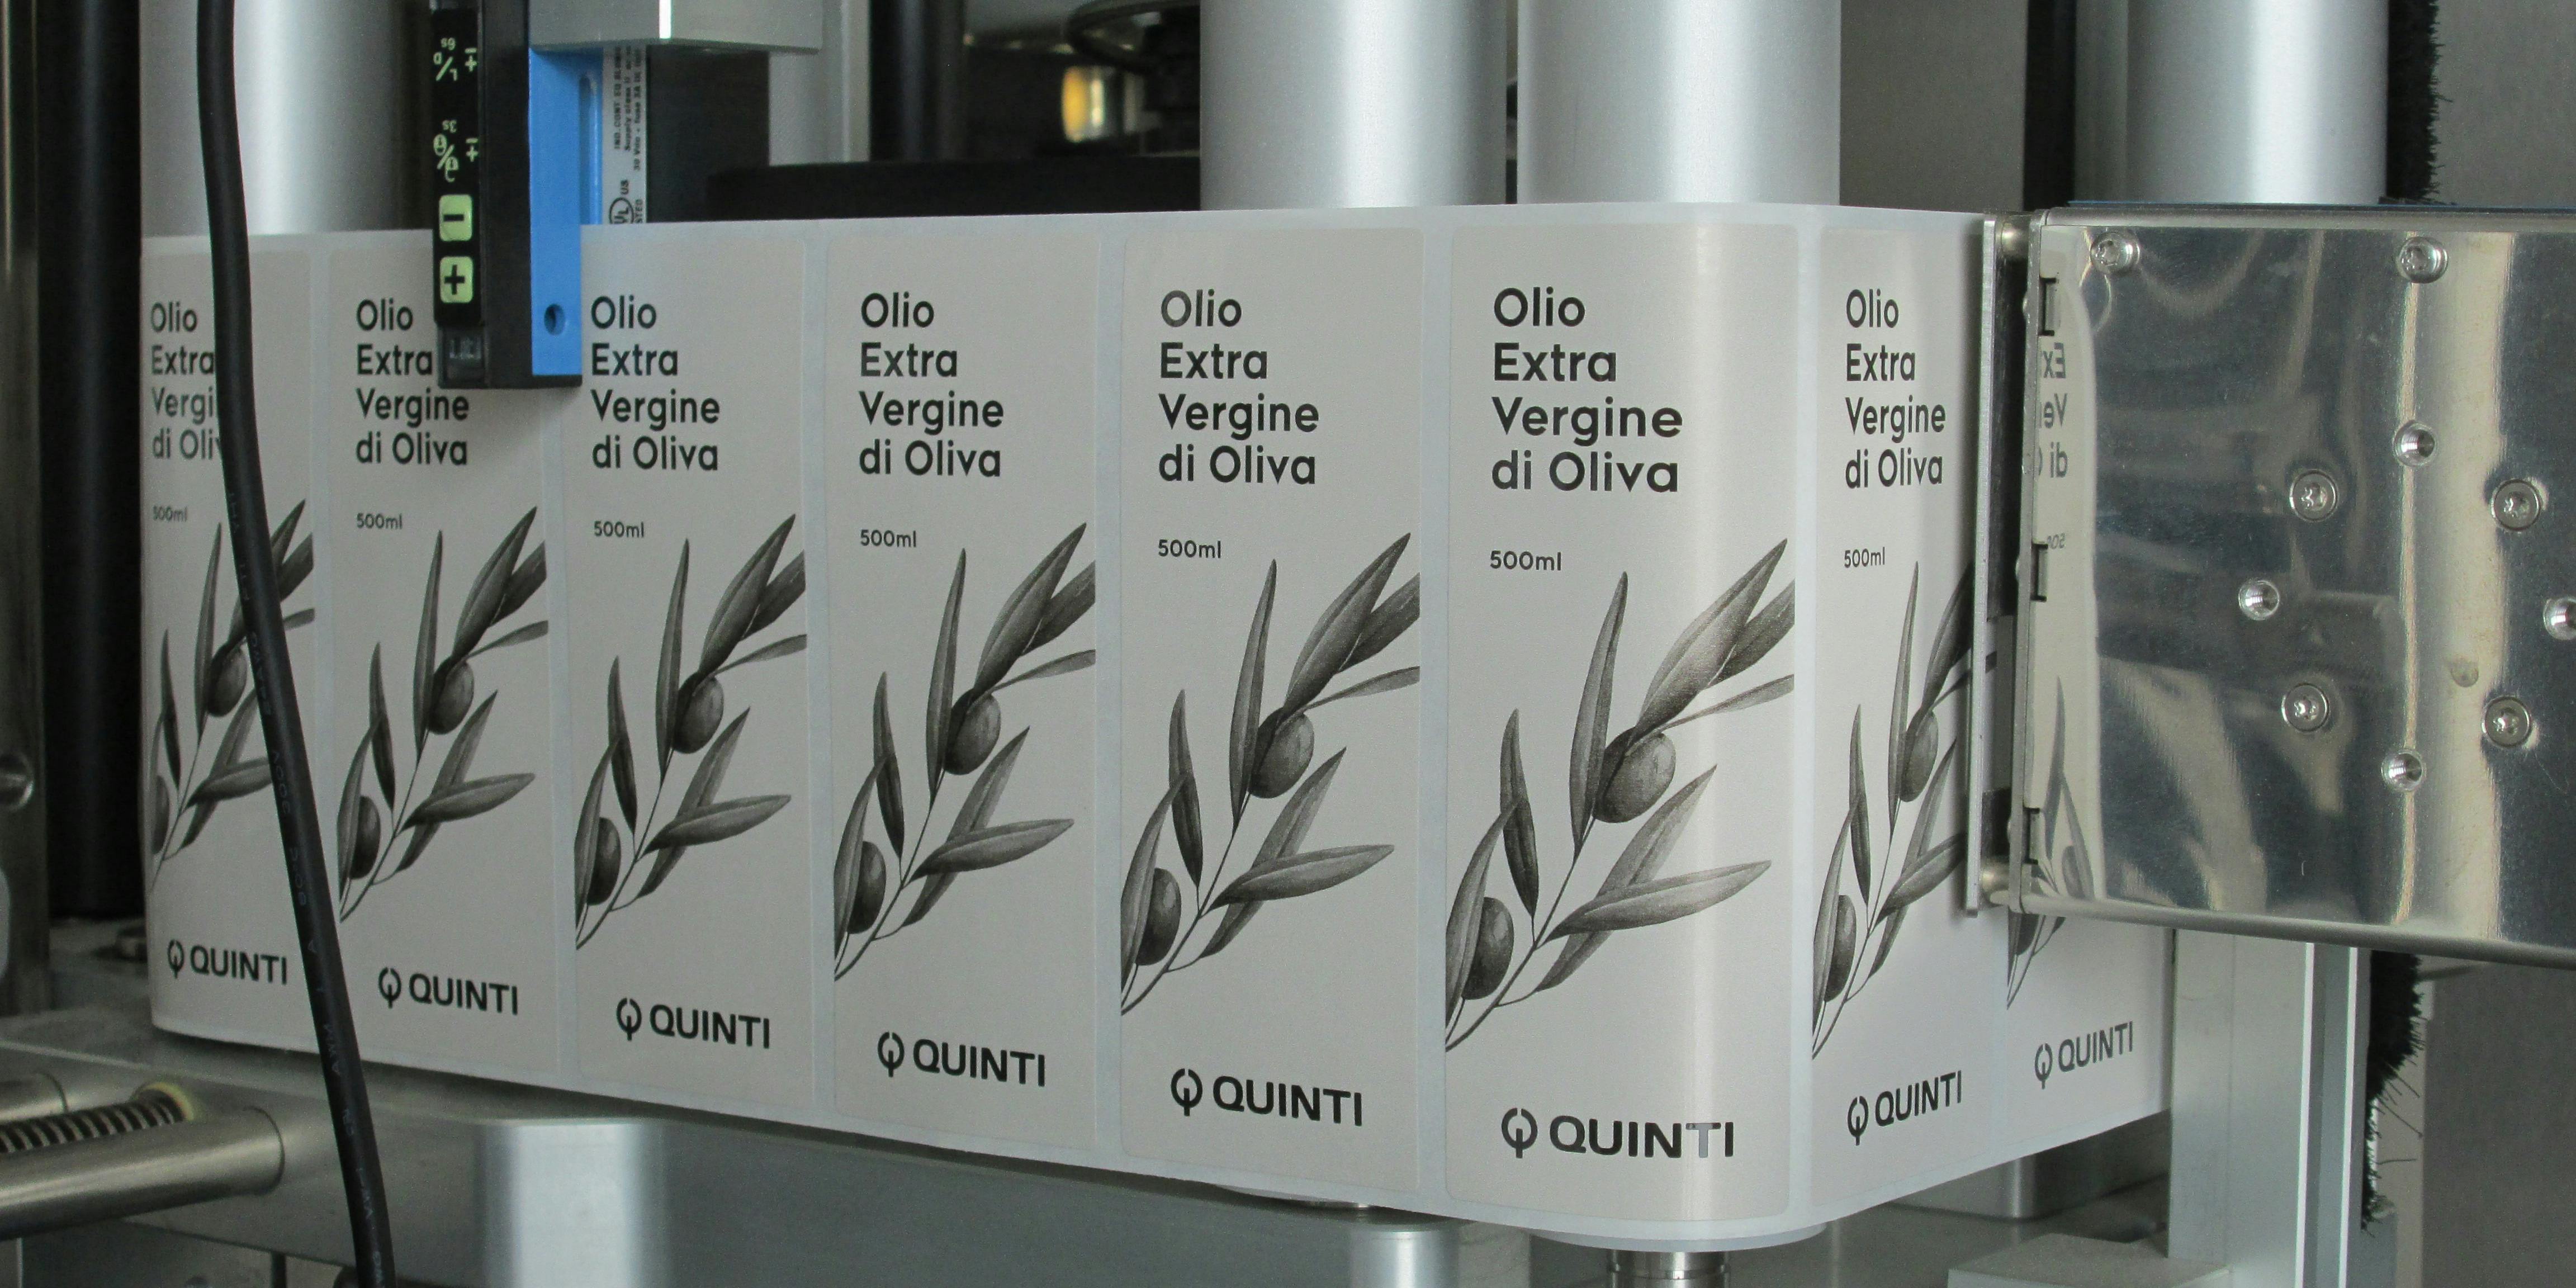 Detail of the machines where you can see rectangular labels on reels, suitable for oil bottles, depicting olive branch and Quinti logo